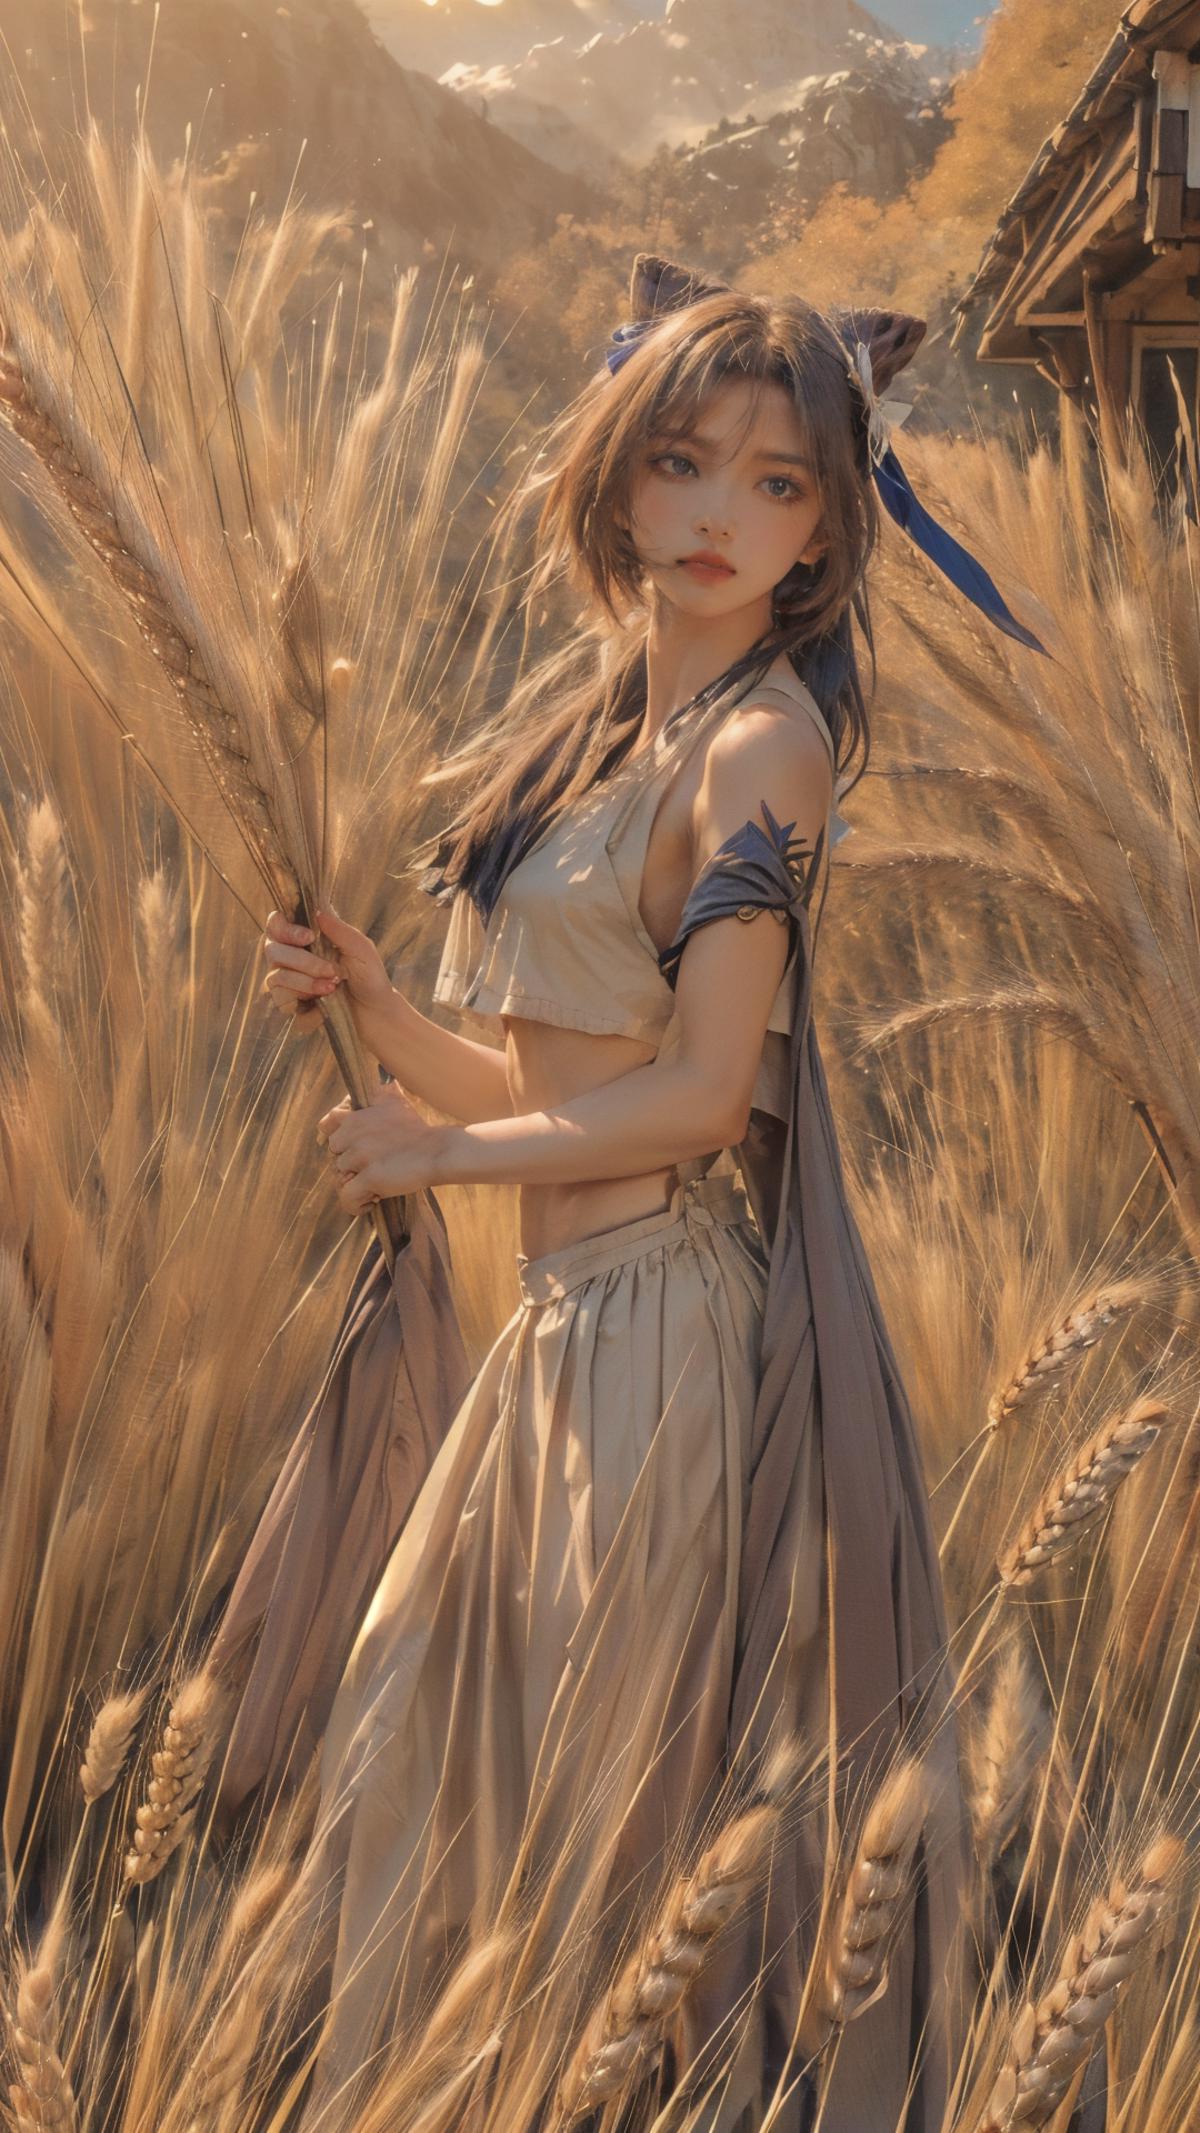 A woman in a white dress holding a wheat stalk.